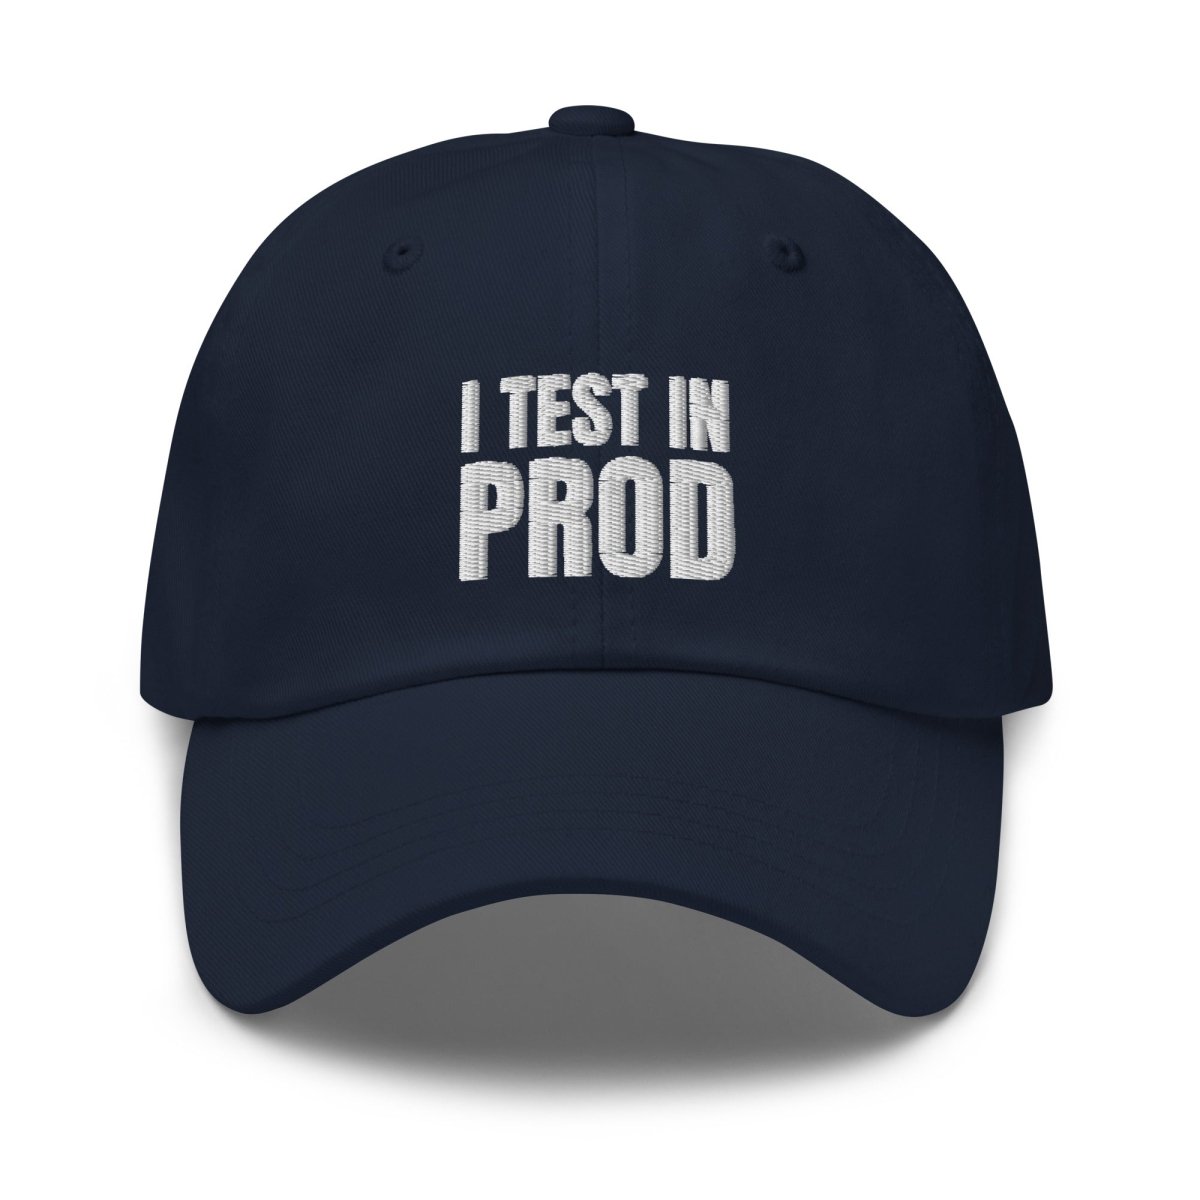 I Test in Prod Embroidered Cap - Navy - AI Store